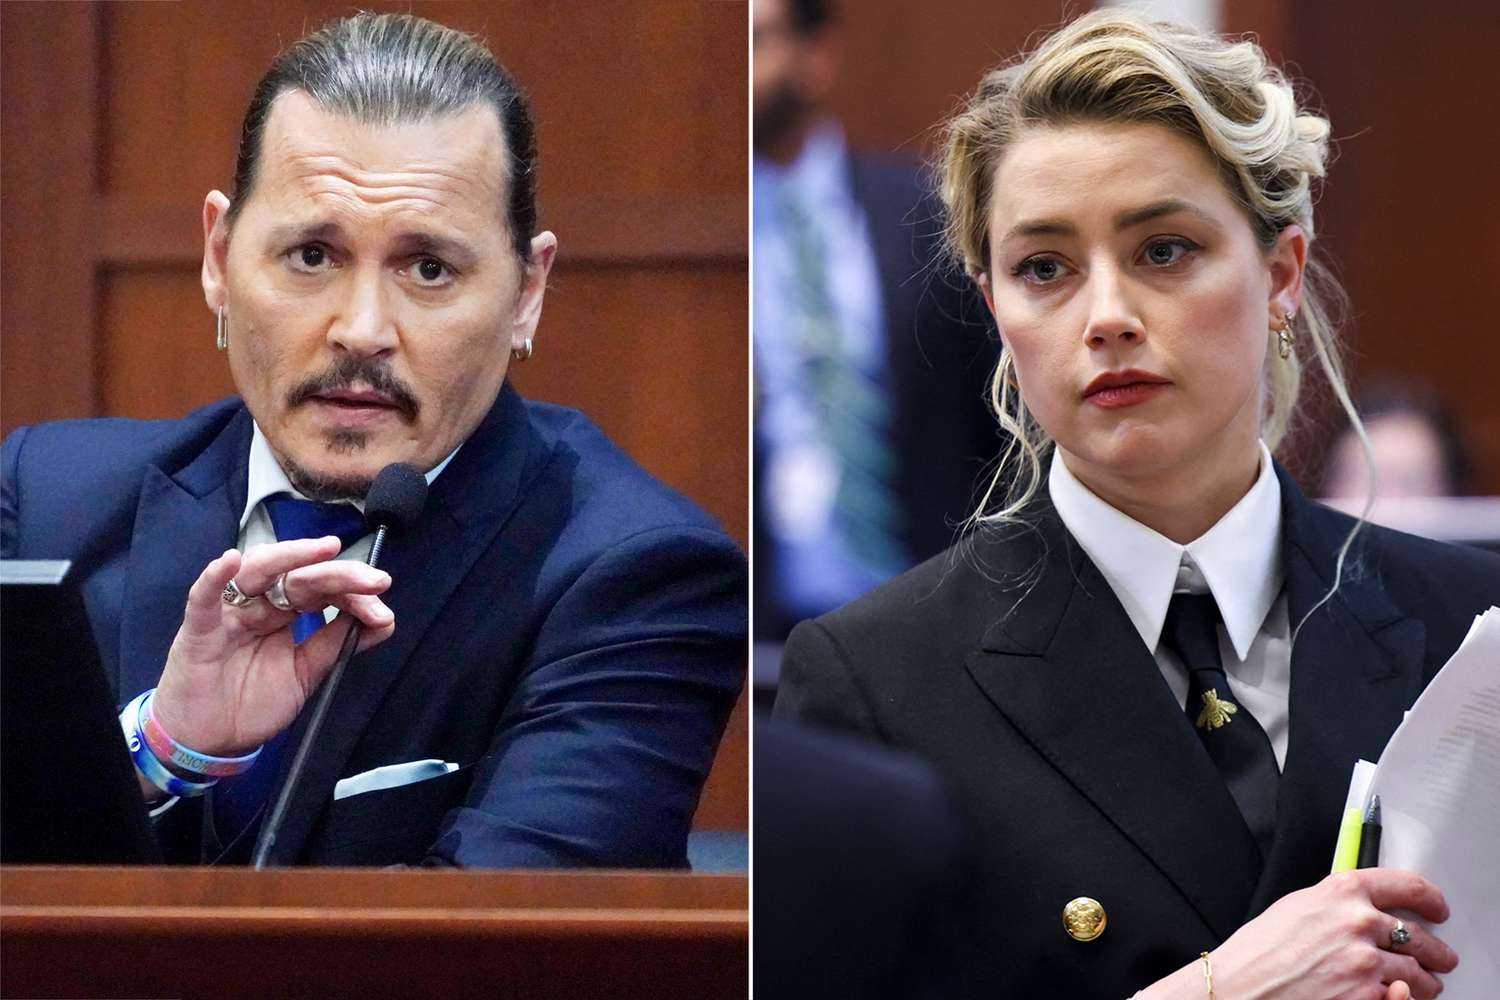 Johnny Depp's controversial cavity search on Amber Heard revisited